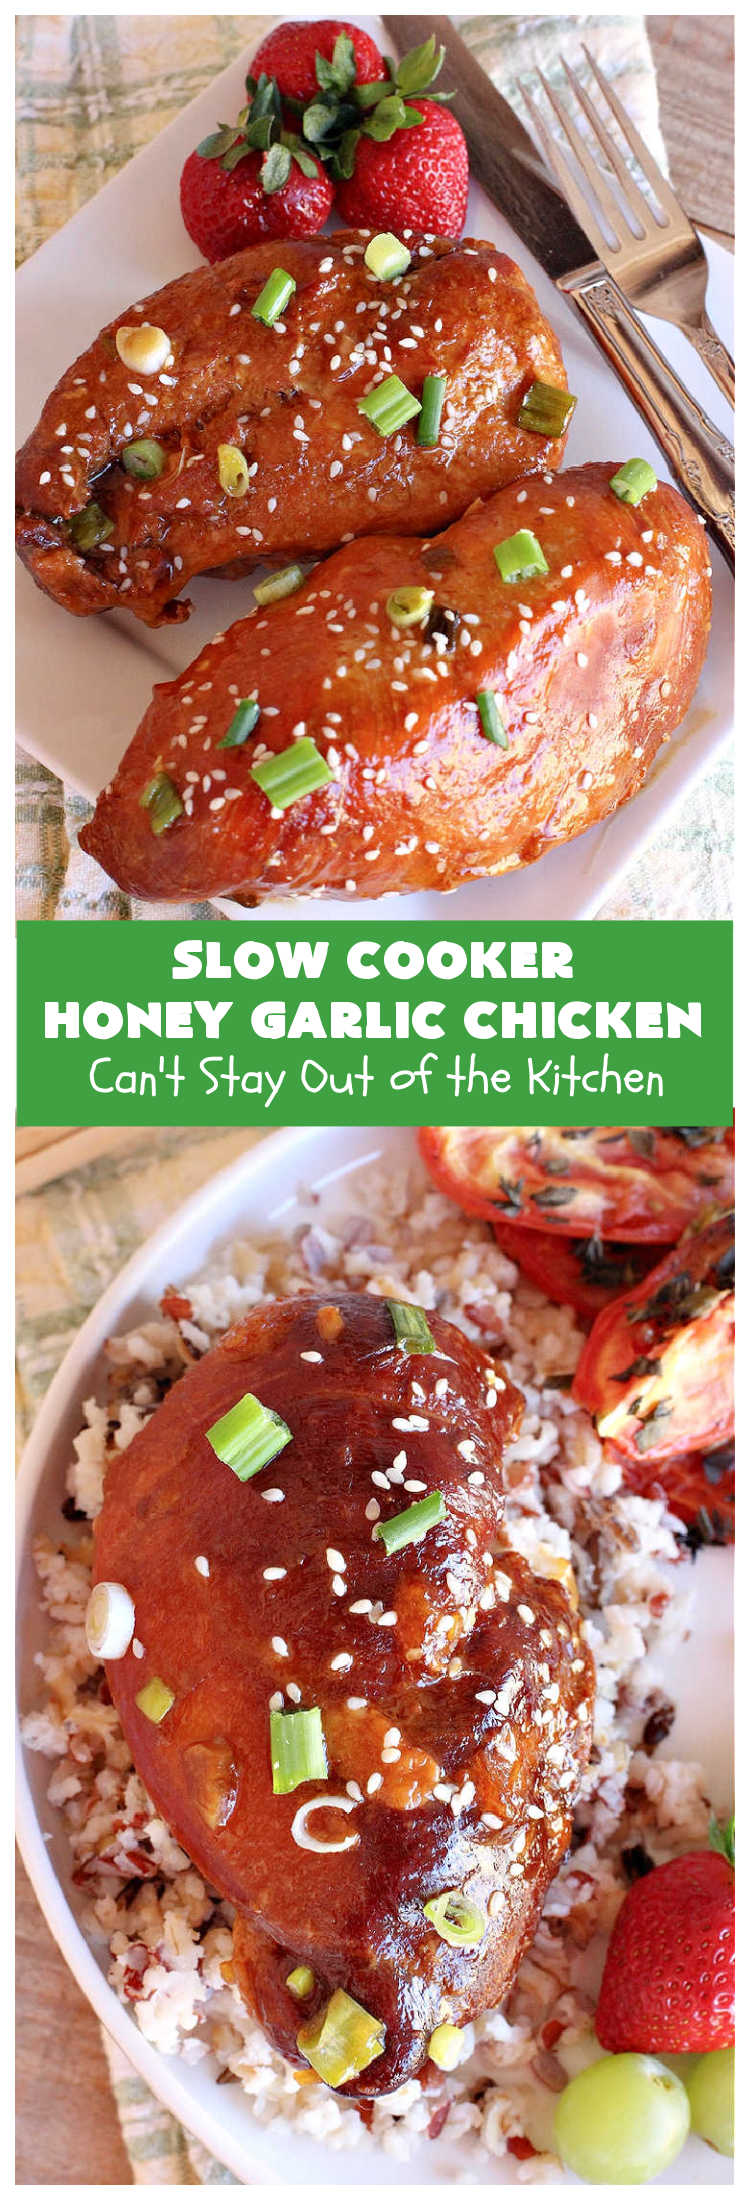 Slow Cooker Honey Garlic Chicken | Can't Stay Out of the Kitchen | this is one of the easiest #Asian style #chicken #recipes since the sauce is stirred together in the #crockpot & the #chicken is added on top! Very easy, very delicious, very filling & satisfying. It cooks in a few hours too, so it doesn't take long to prepare. #SlowCooker #honey #garlic #ginger #HoneyGarlicChicken #SlowCookerHoneyGarlicChicken #SlowCookerChickenRecipe